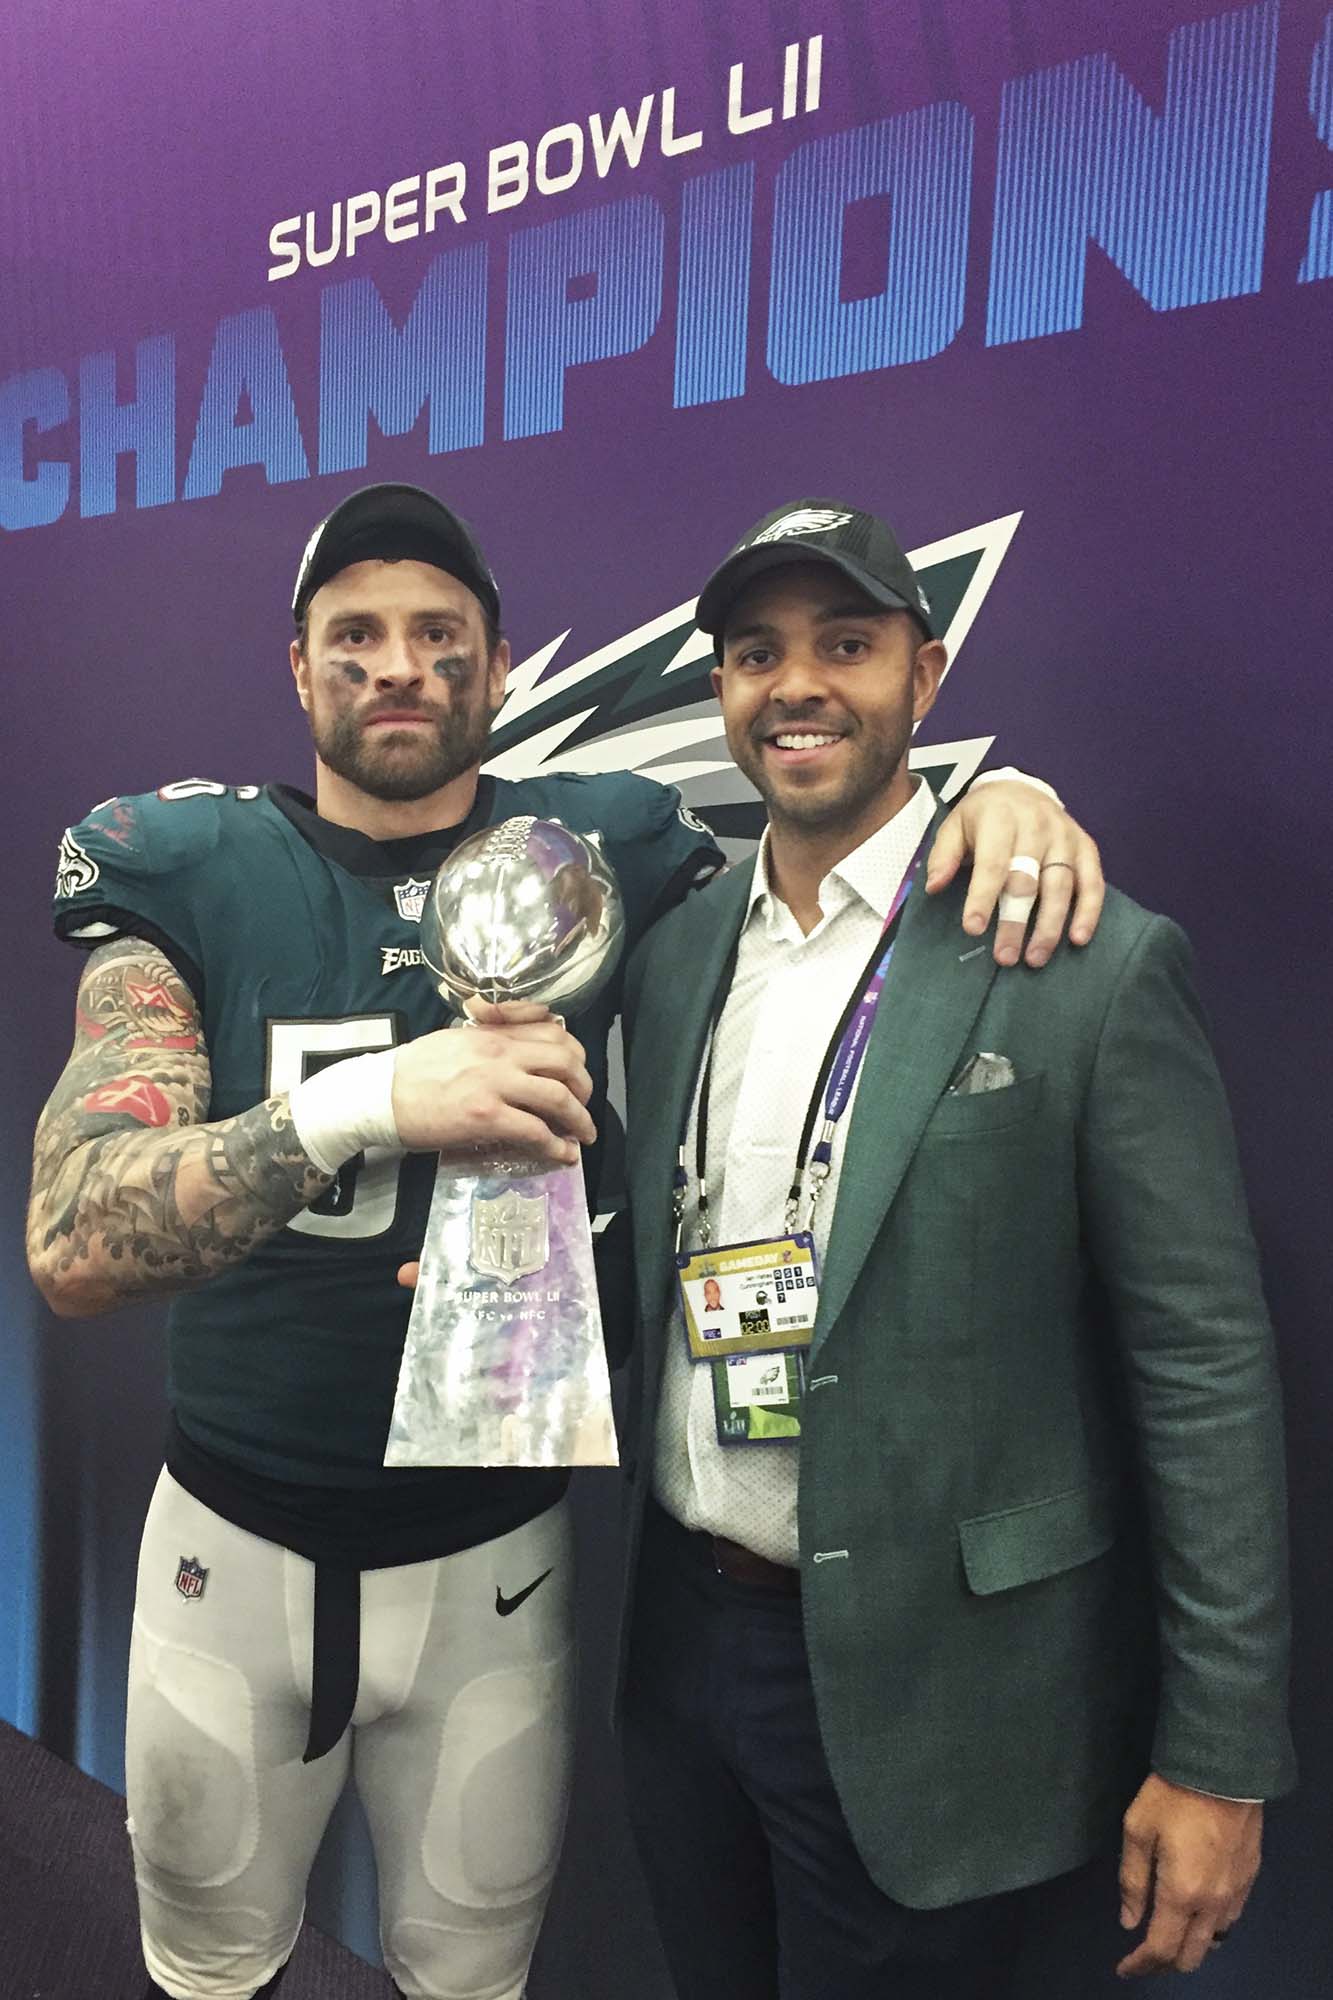 Cunningham, Long (left) standing next to each other holding the Super Bowl Trophy